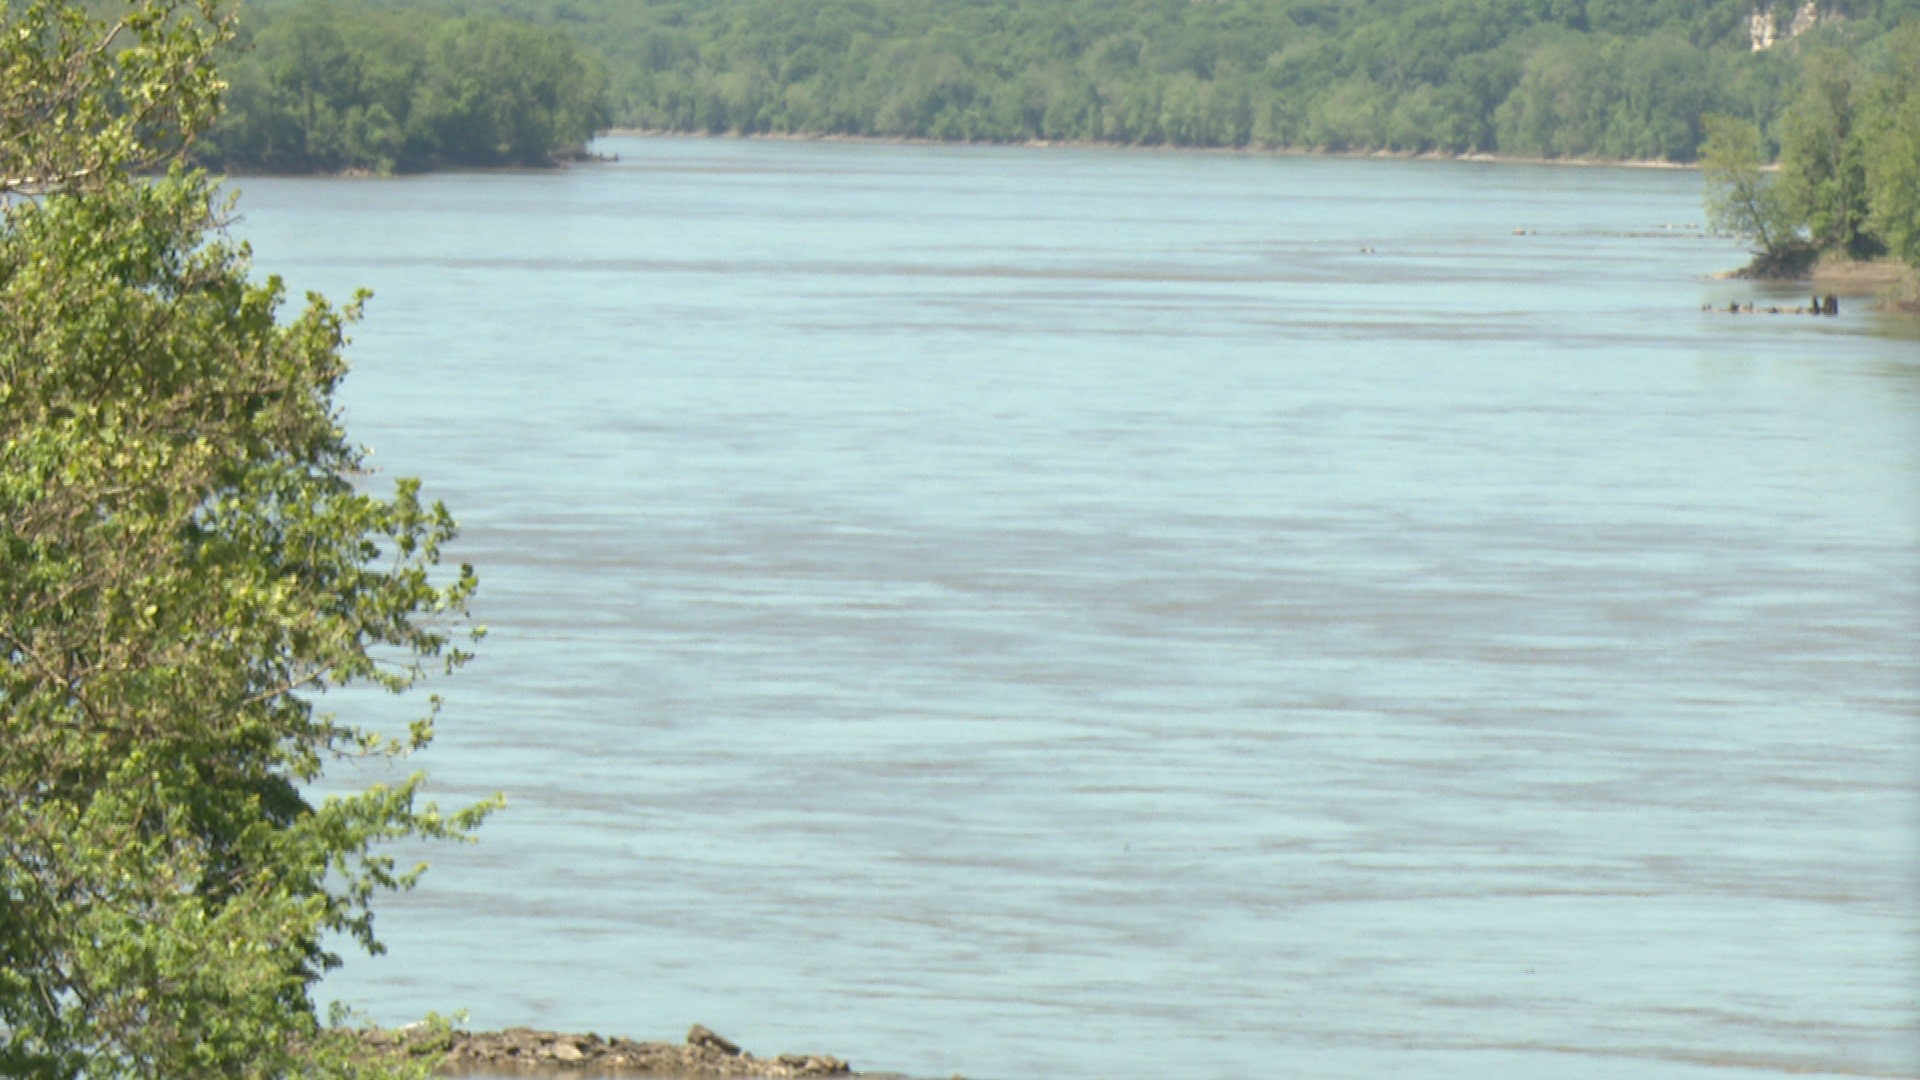 A body was found in the Missouri River Wednesday morning, days after a canoe capsized. Officials have not released the victim's name.